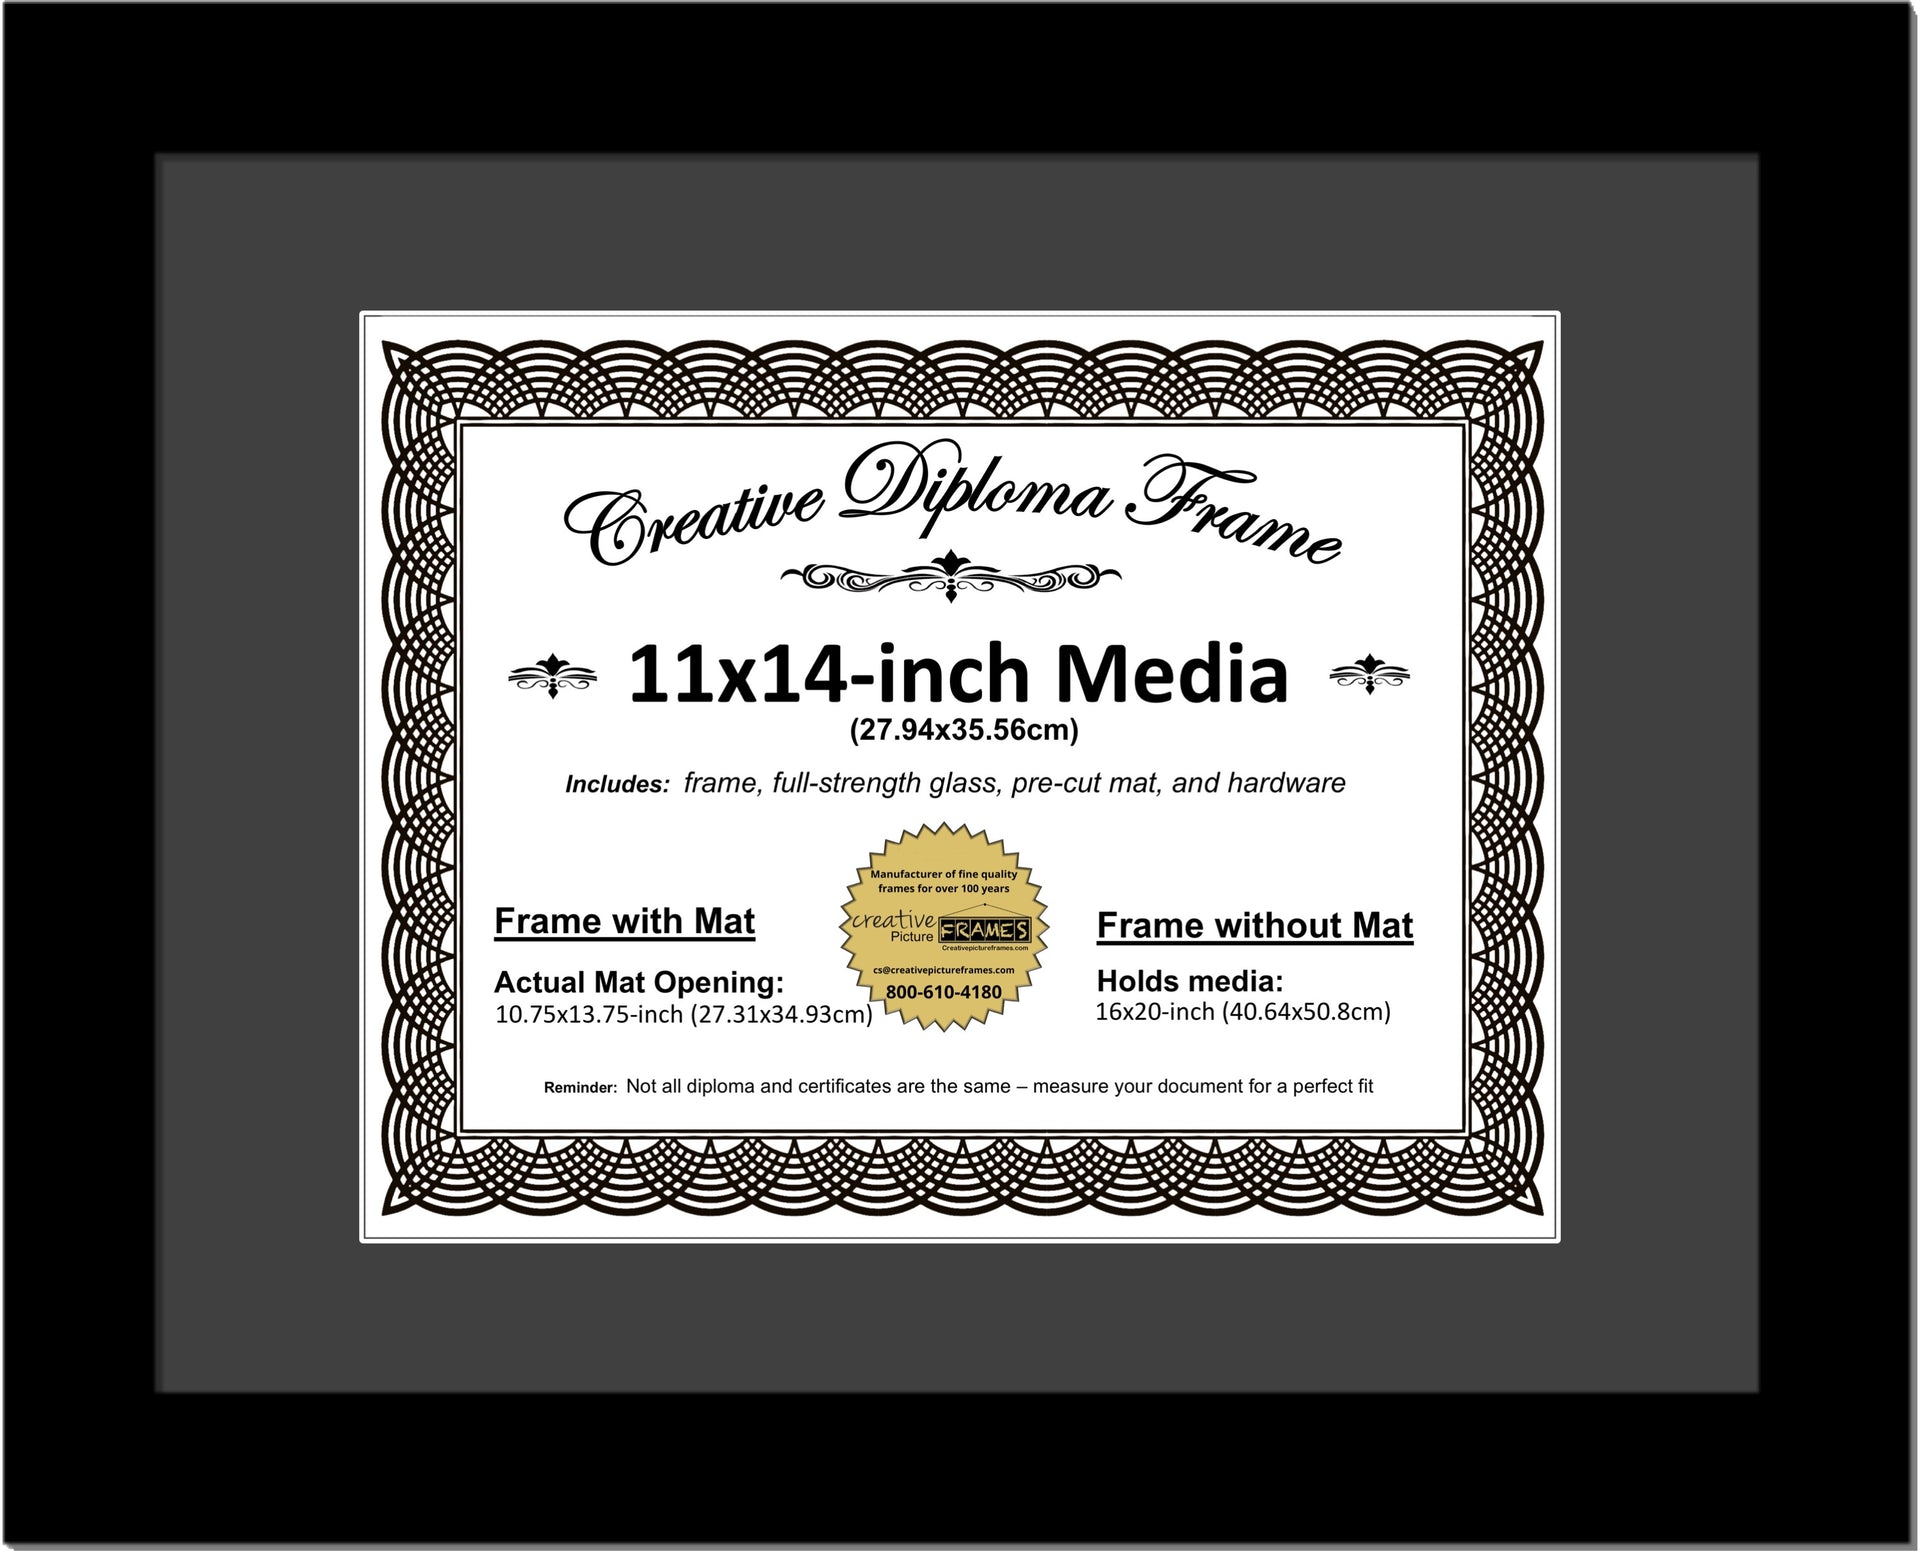 Law Degree Certificate License 16 x 20 Double Mat with Magahony Frame